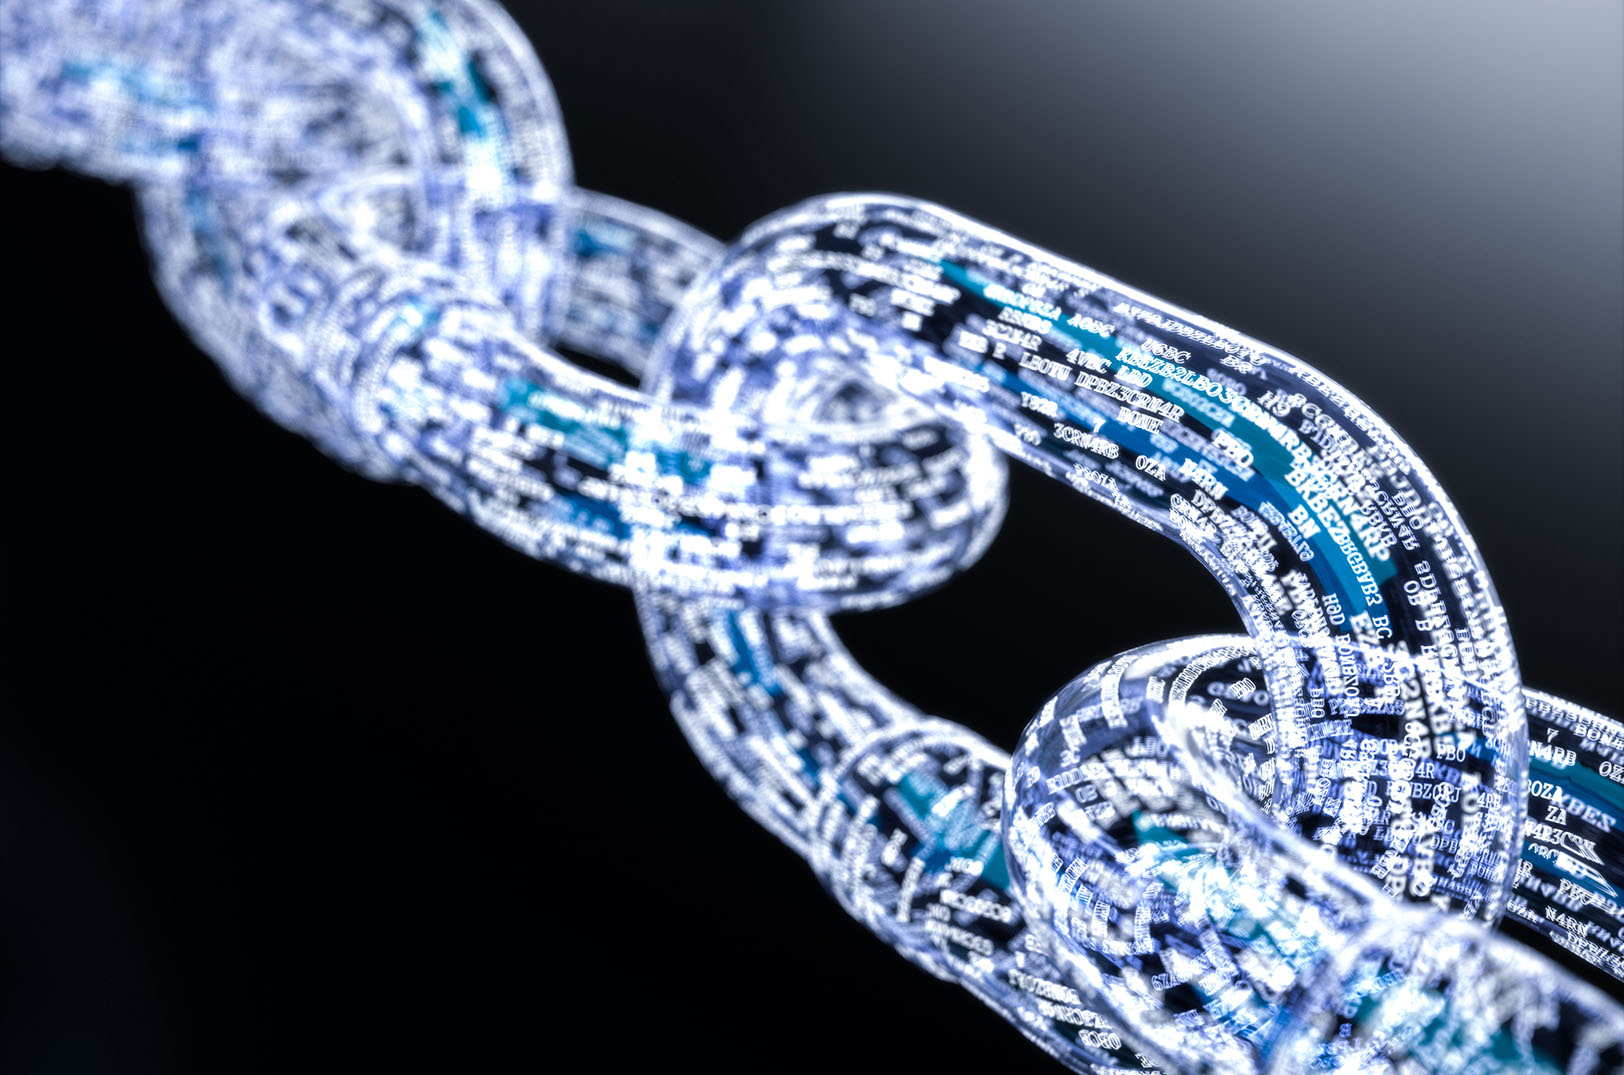 Blockchain Basics: Emerging tech is a silver bullet for some, but not a universal solution